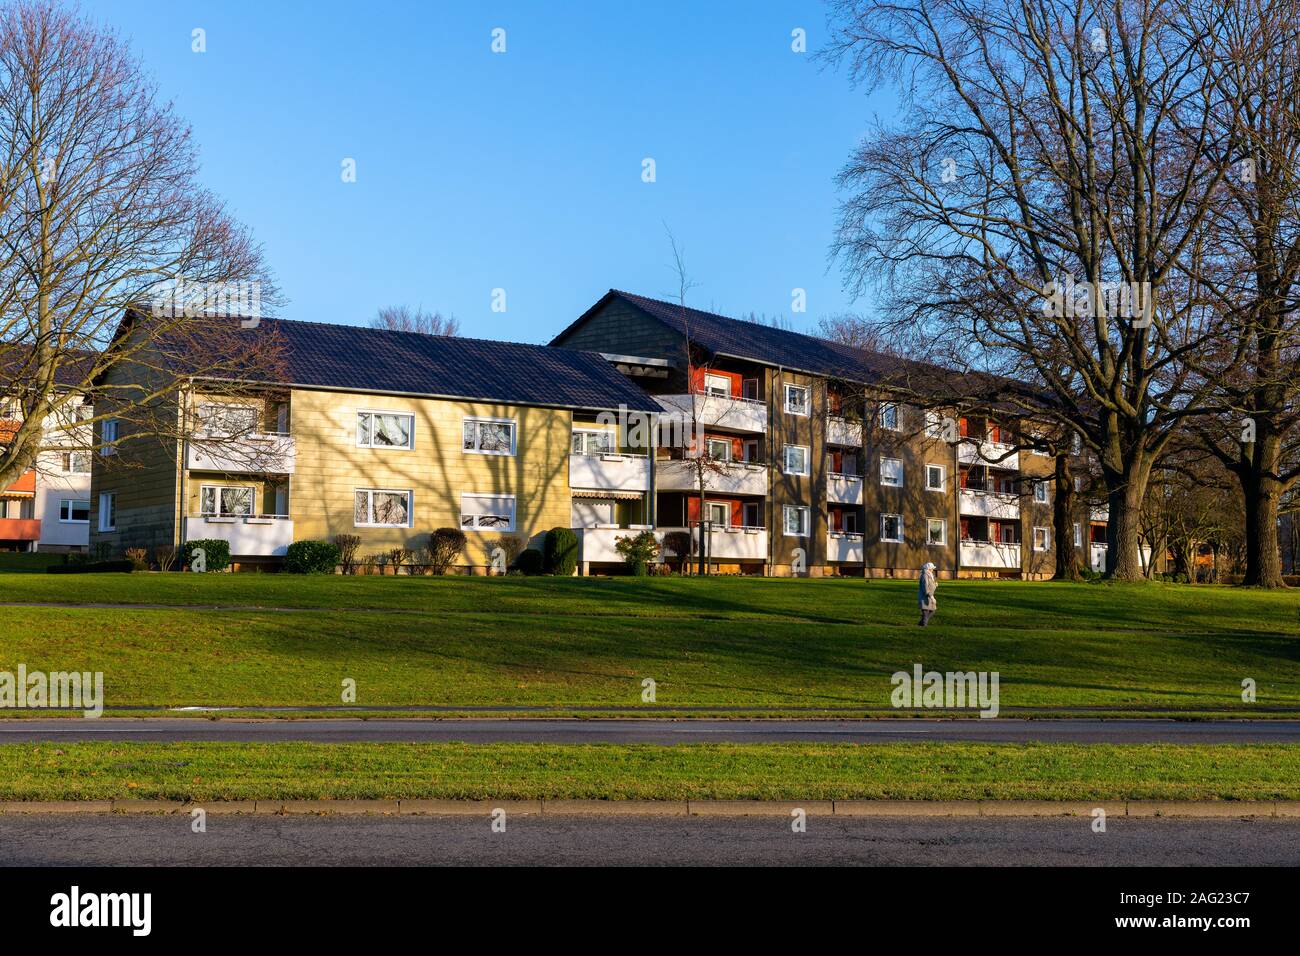 Weather in Northern Germany has been very warm this winter. Bright sunshine and green grass make it hard to grasp that christmas is in two weeks. Stock Photo